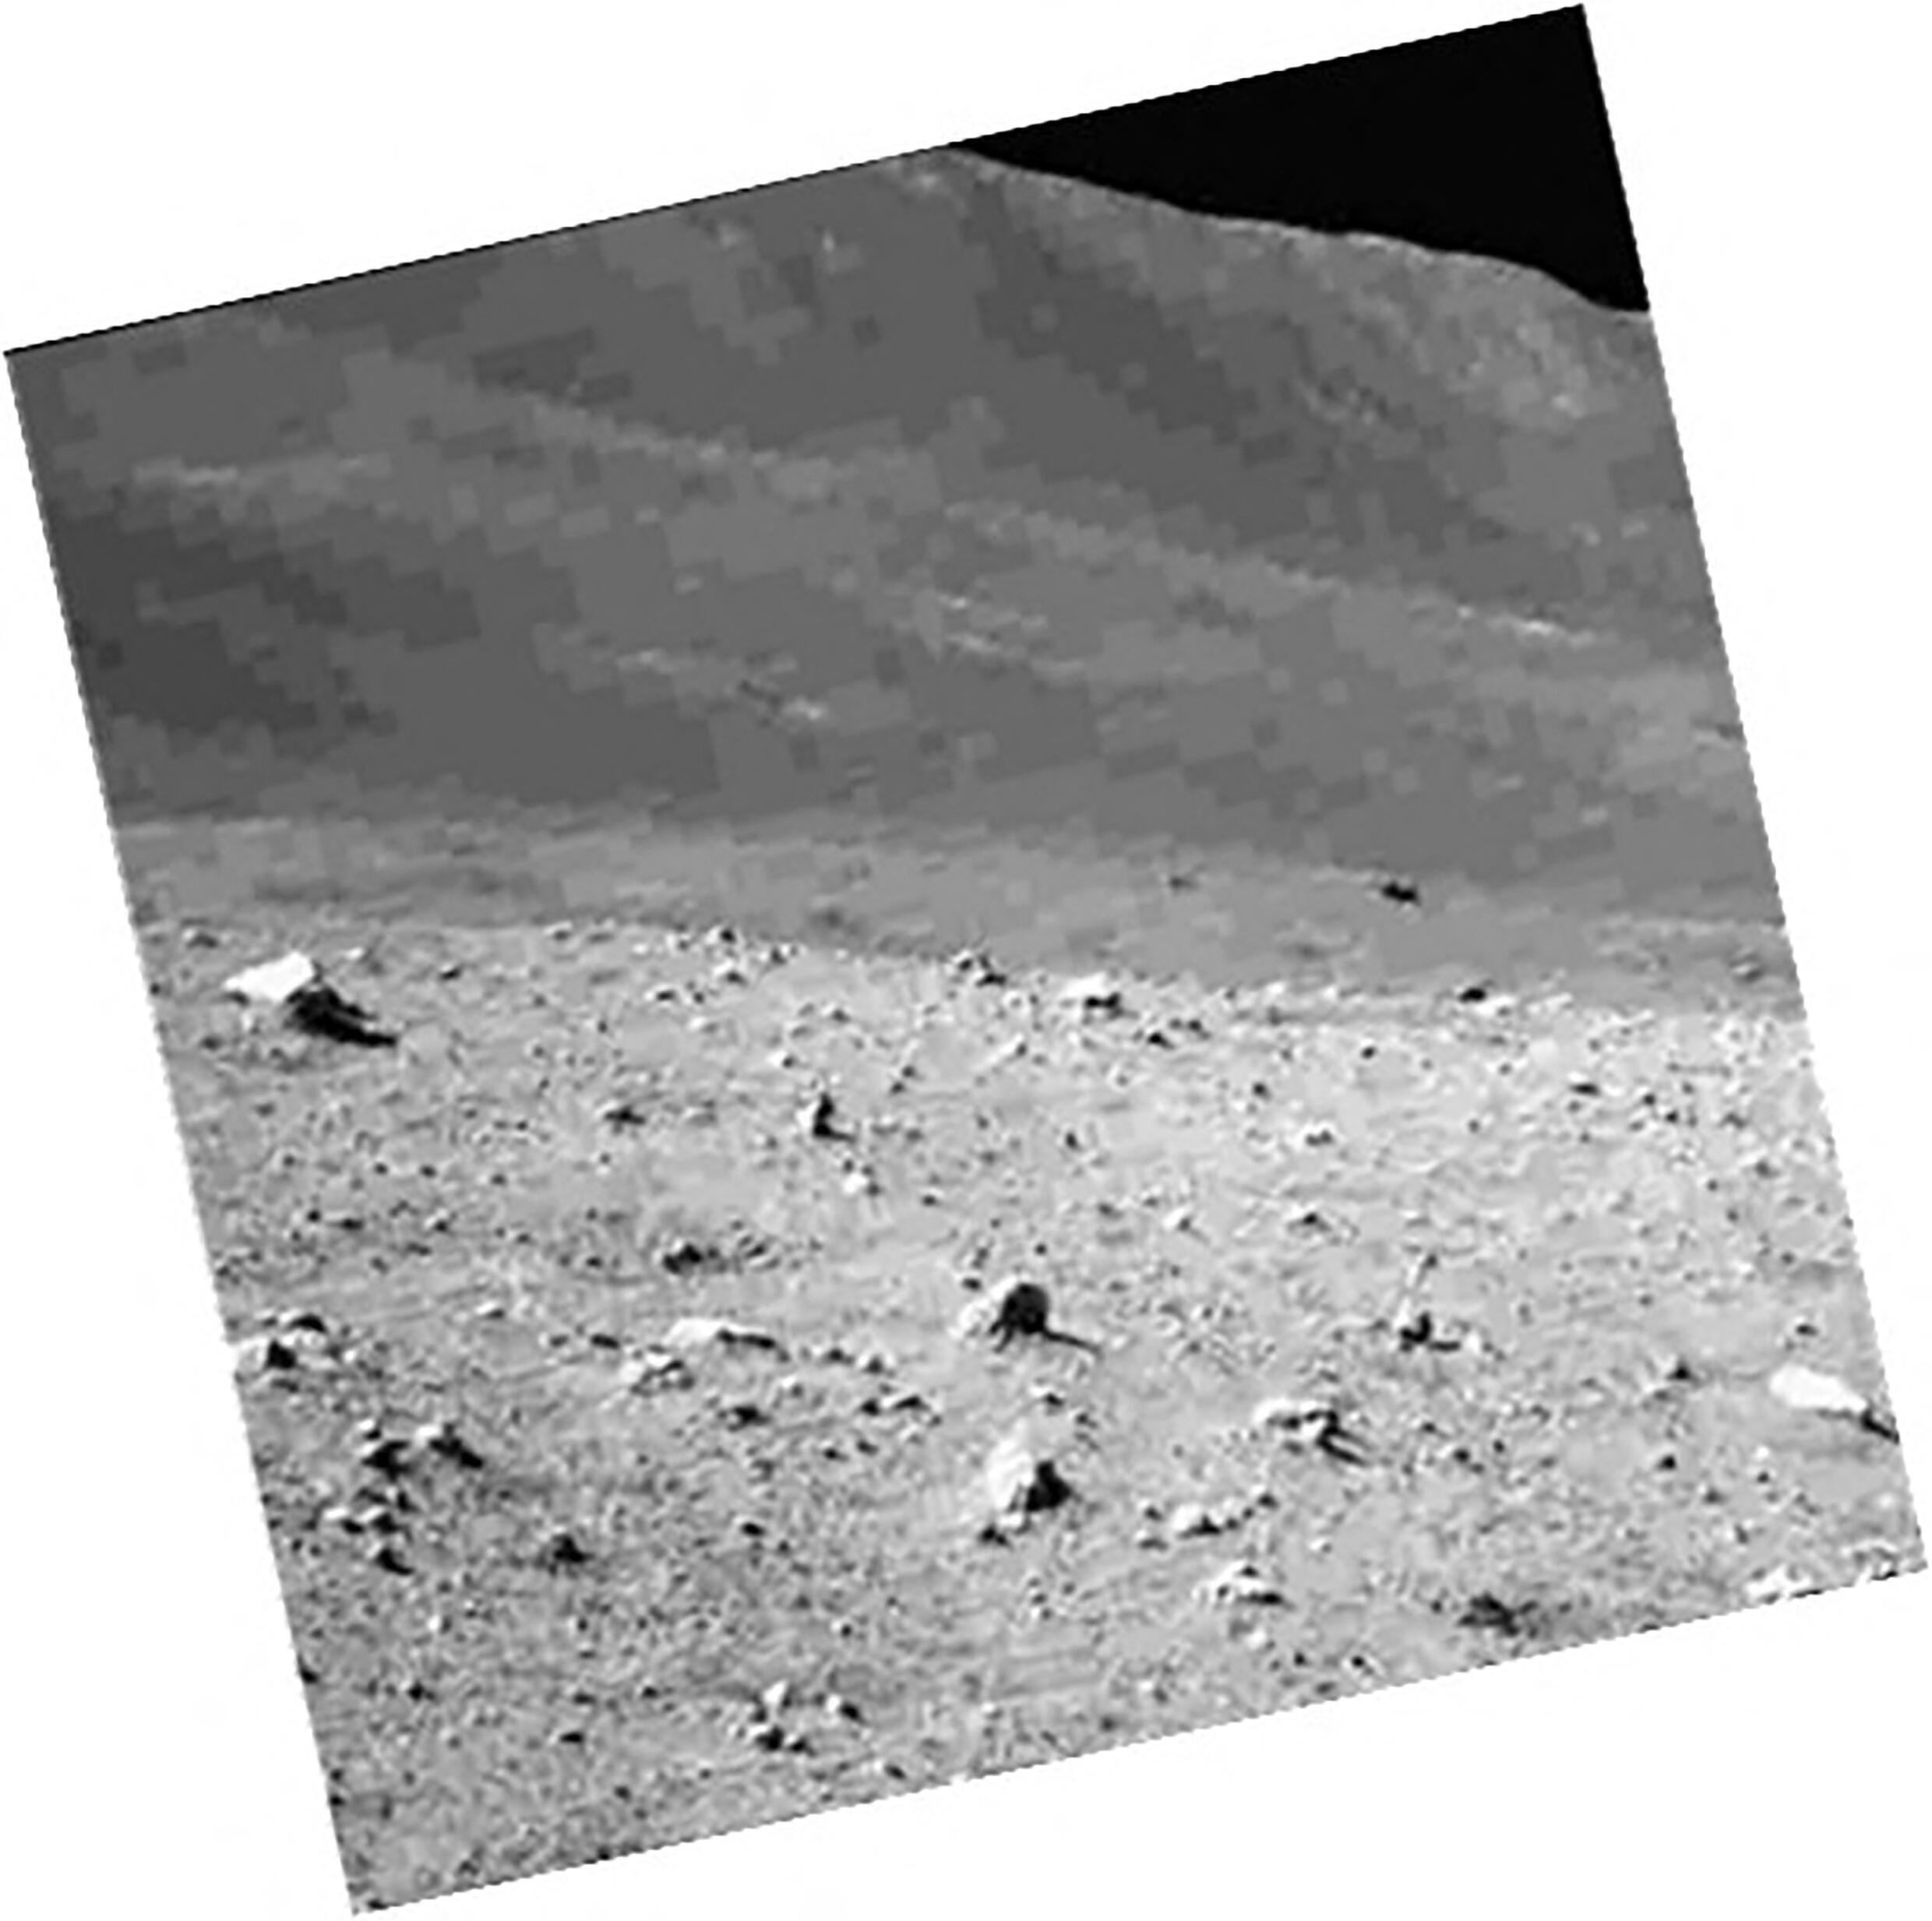 This handout photo released on January 25, 2024 shows a mosaic of monochrome images of the lunar surface.